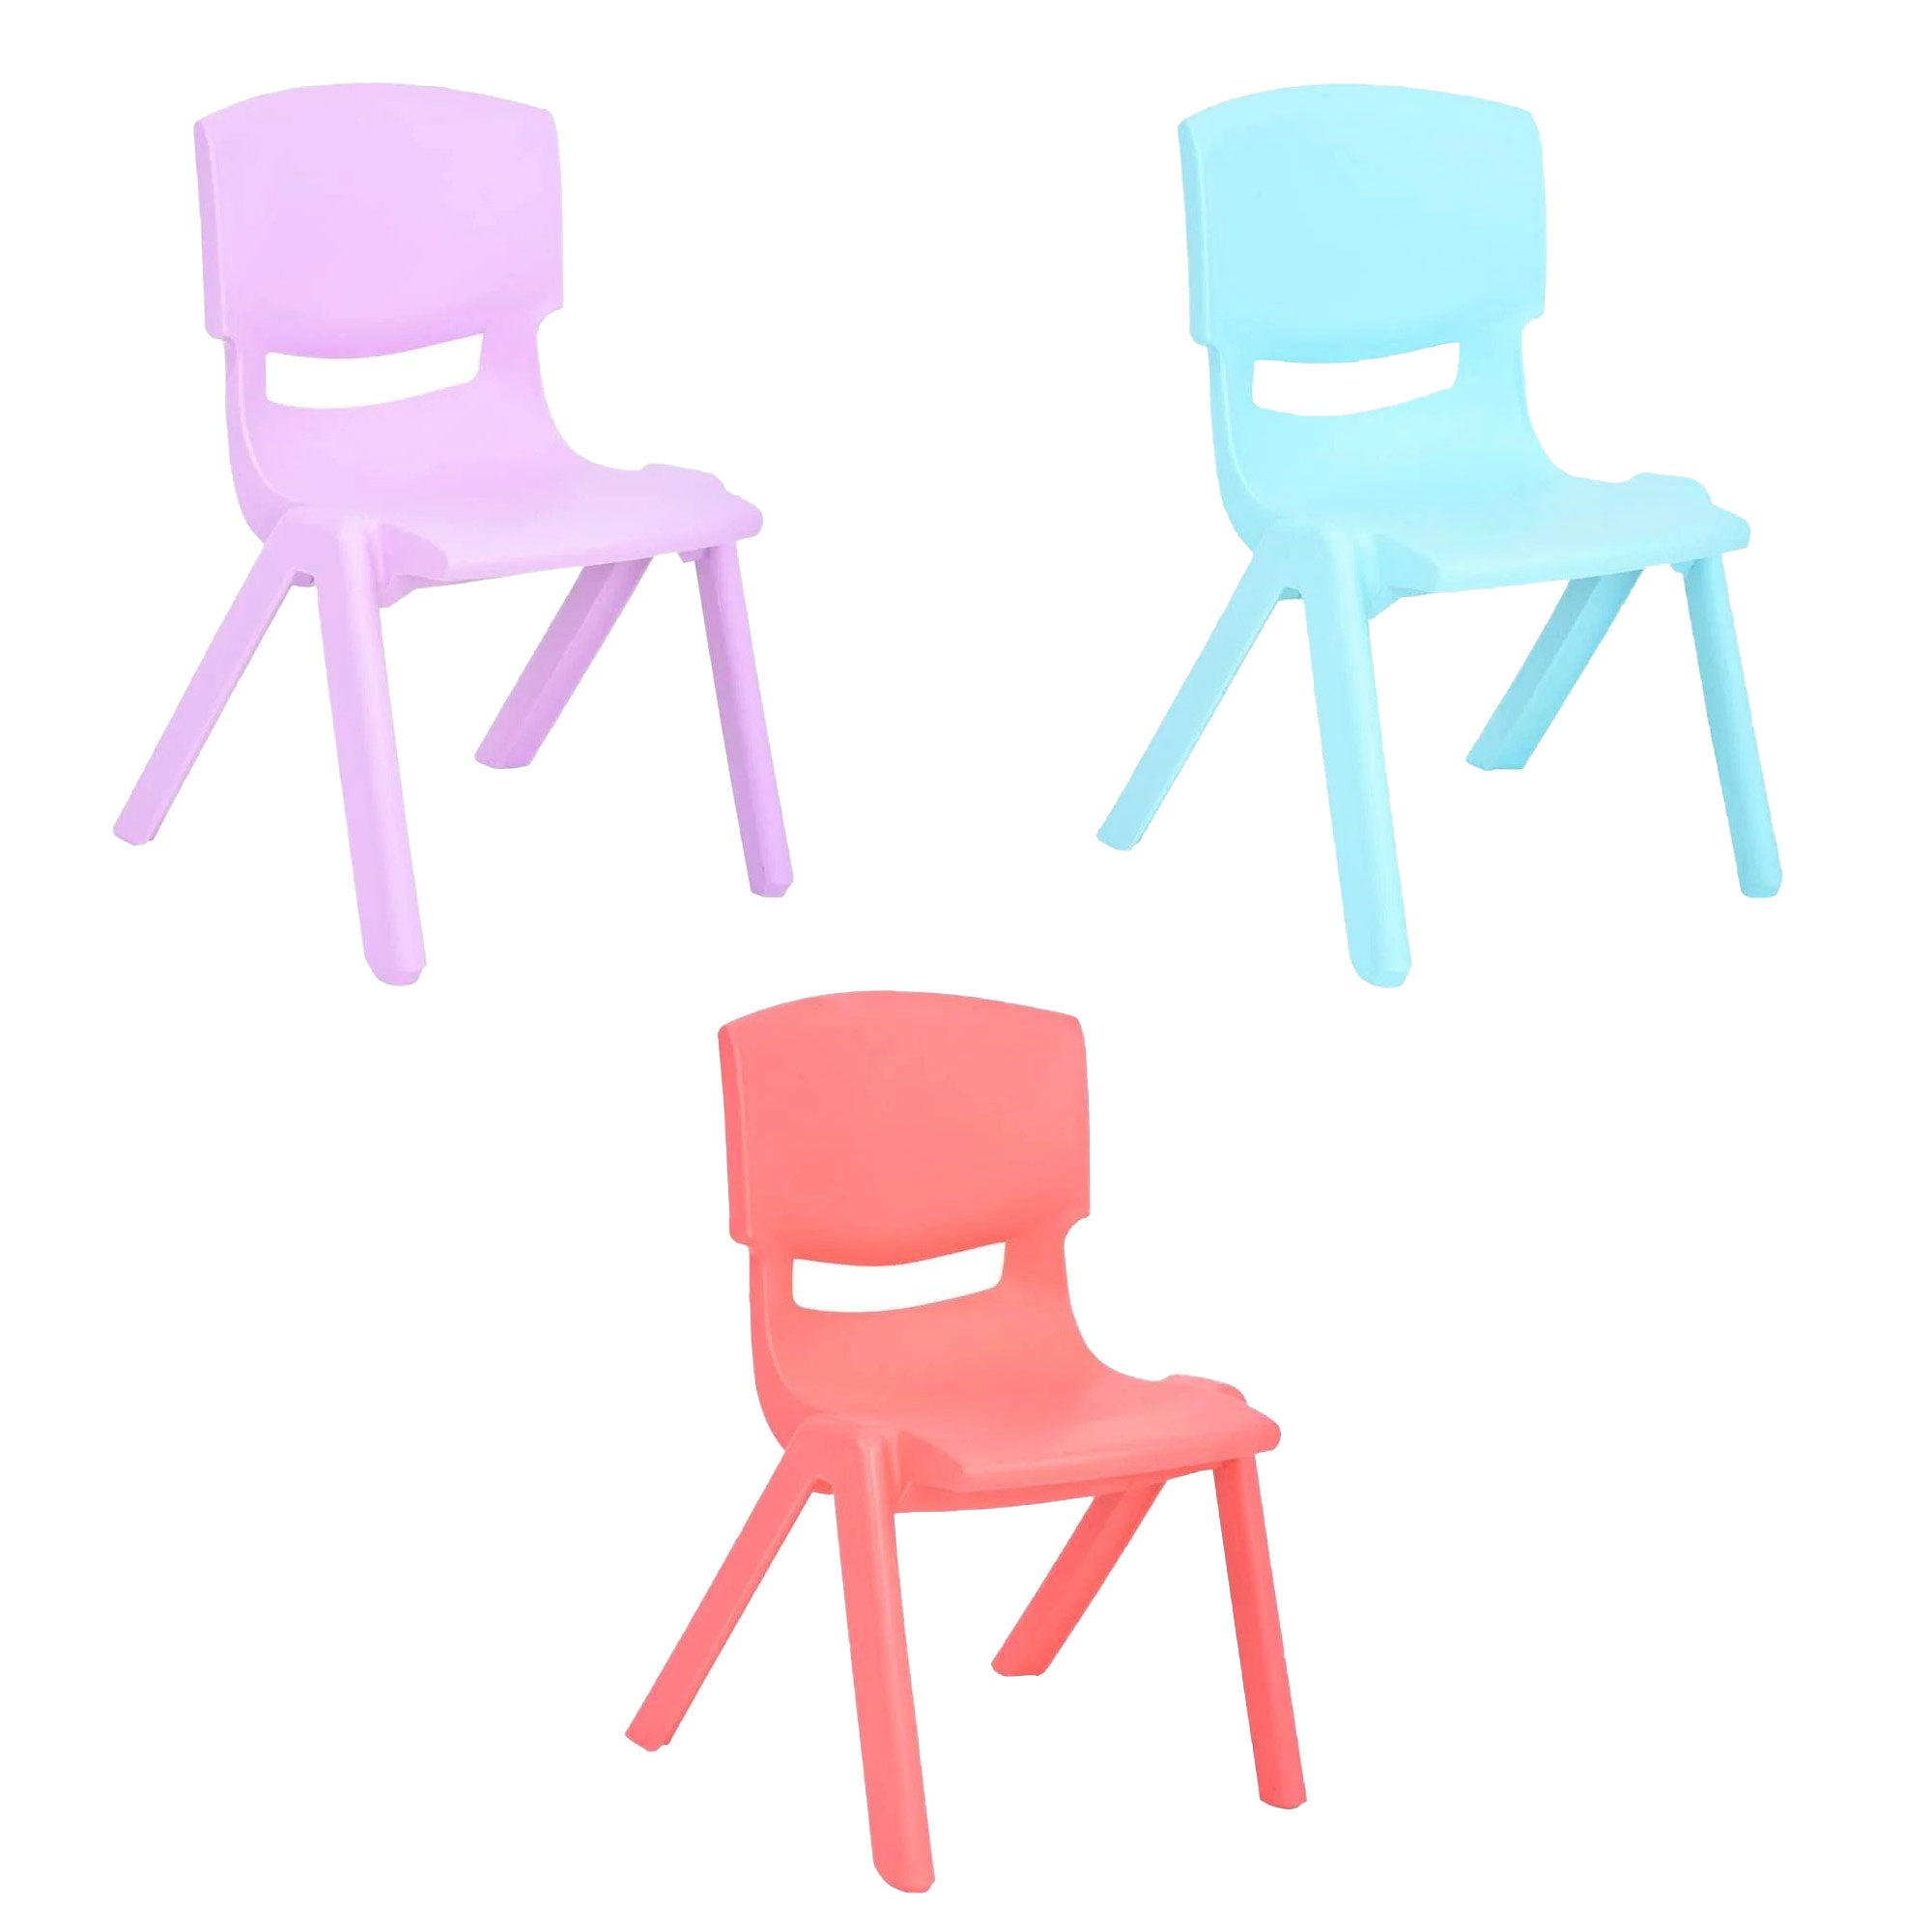 JOON Stackable Plastic Kids Learning Chairs Set, Lilac-Baby Blue-Coral